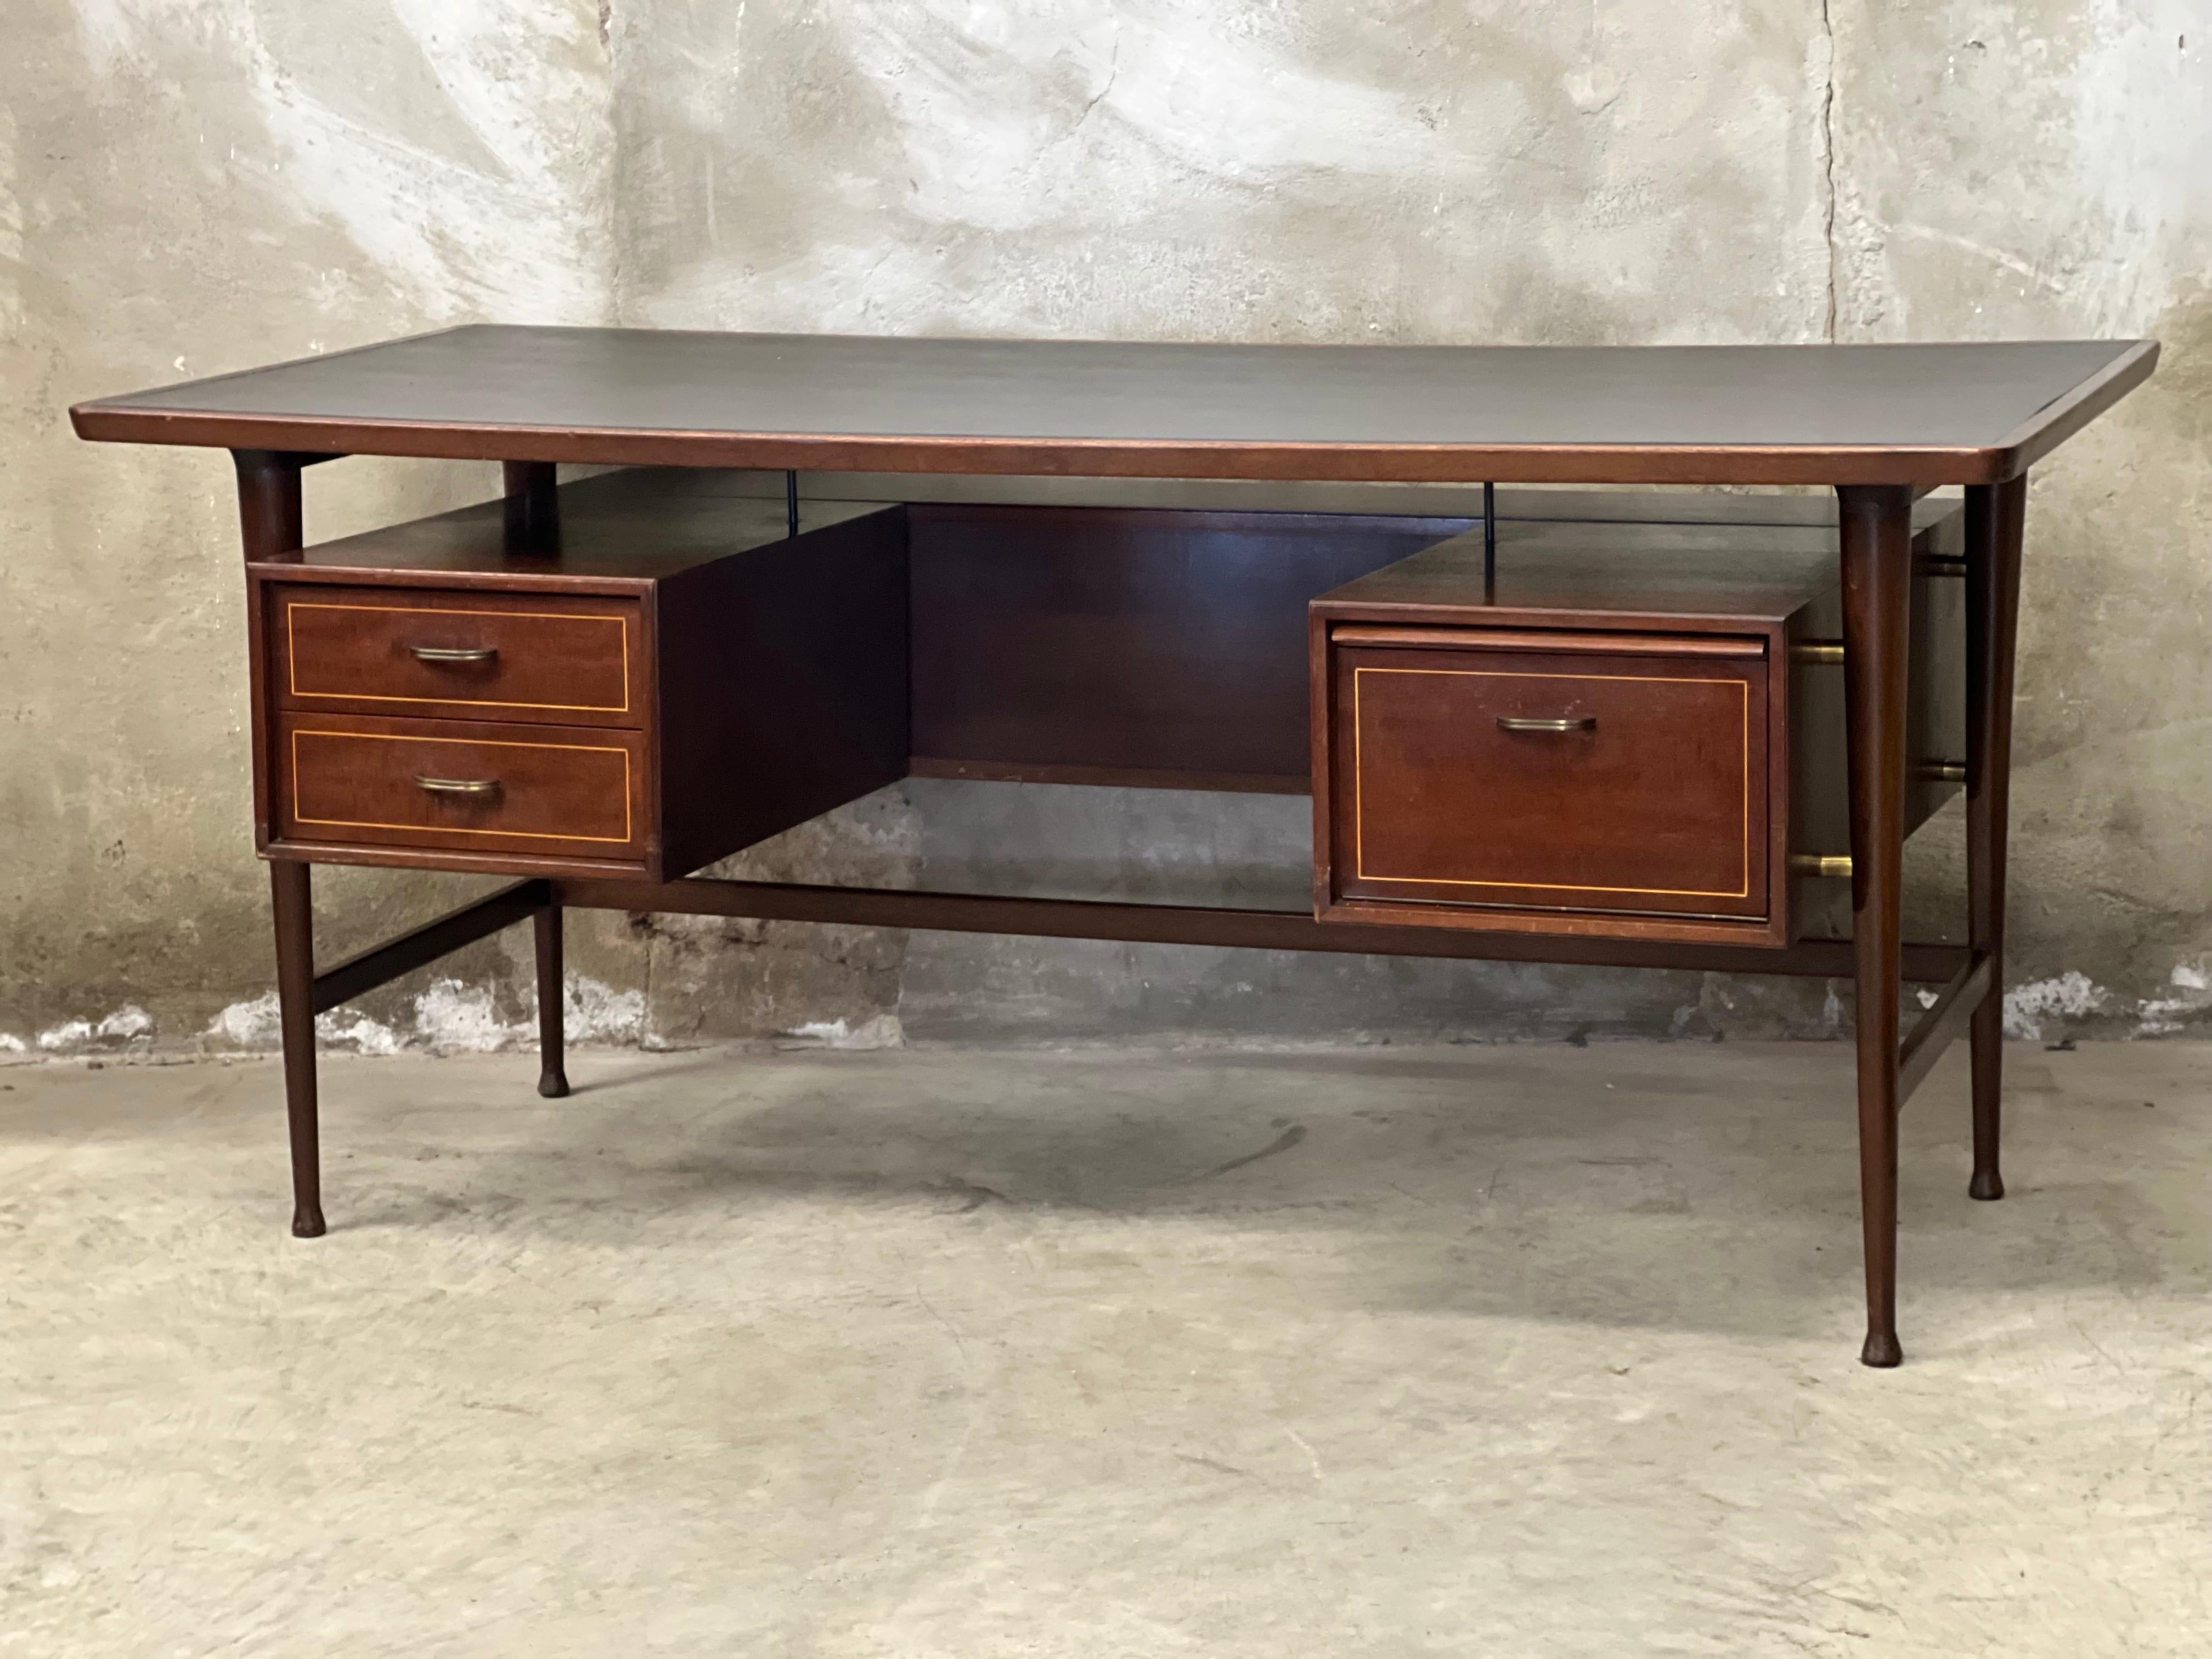 A rarity, this mid-century executive desk, Danish design with leather top inlay. Purchased once at the renowned Greeve furniture furnishings from Hilversum/Bussum. A furniture store that was known for high-end furniture in Art Deco, Amsterdam School